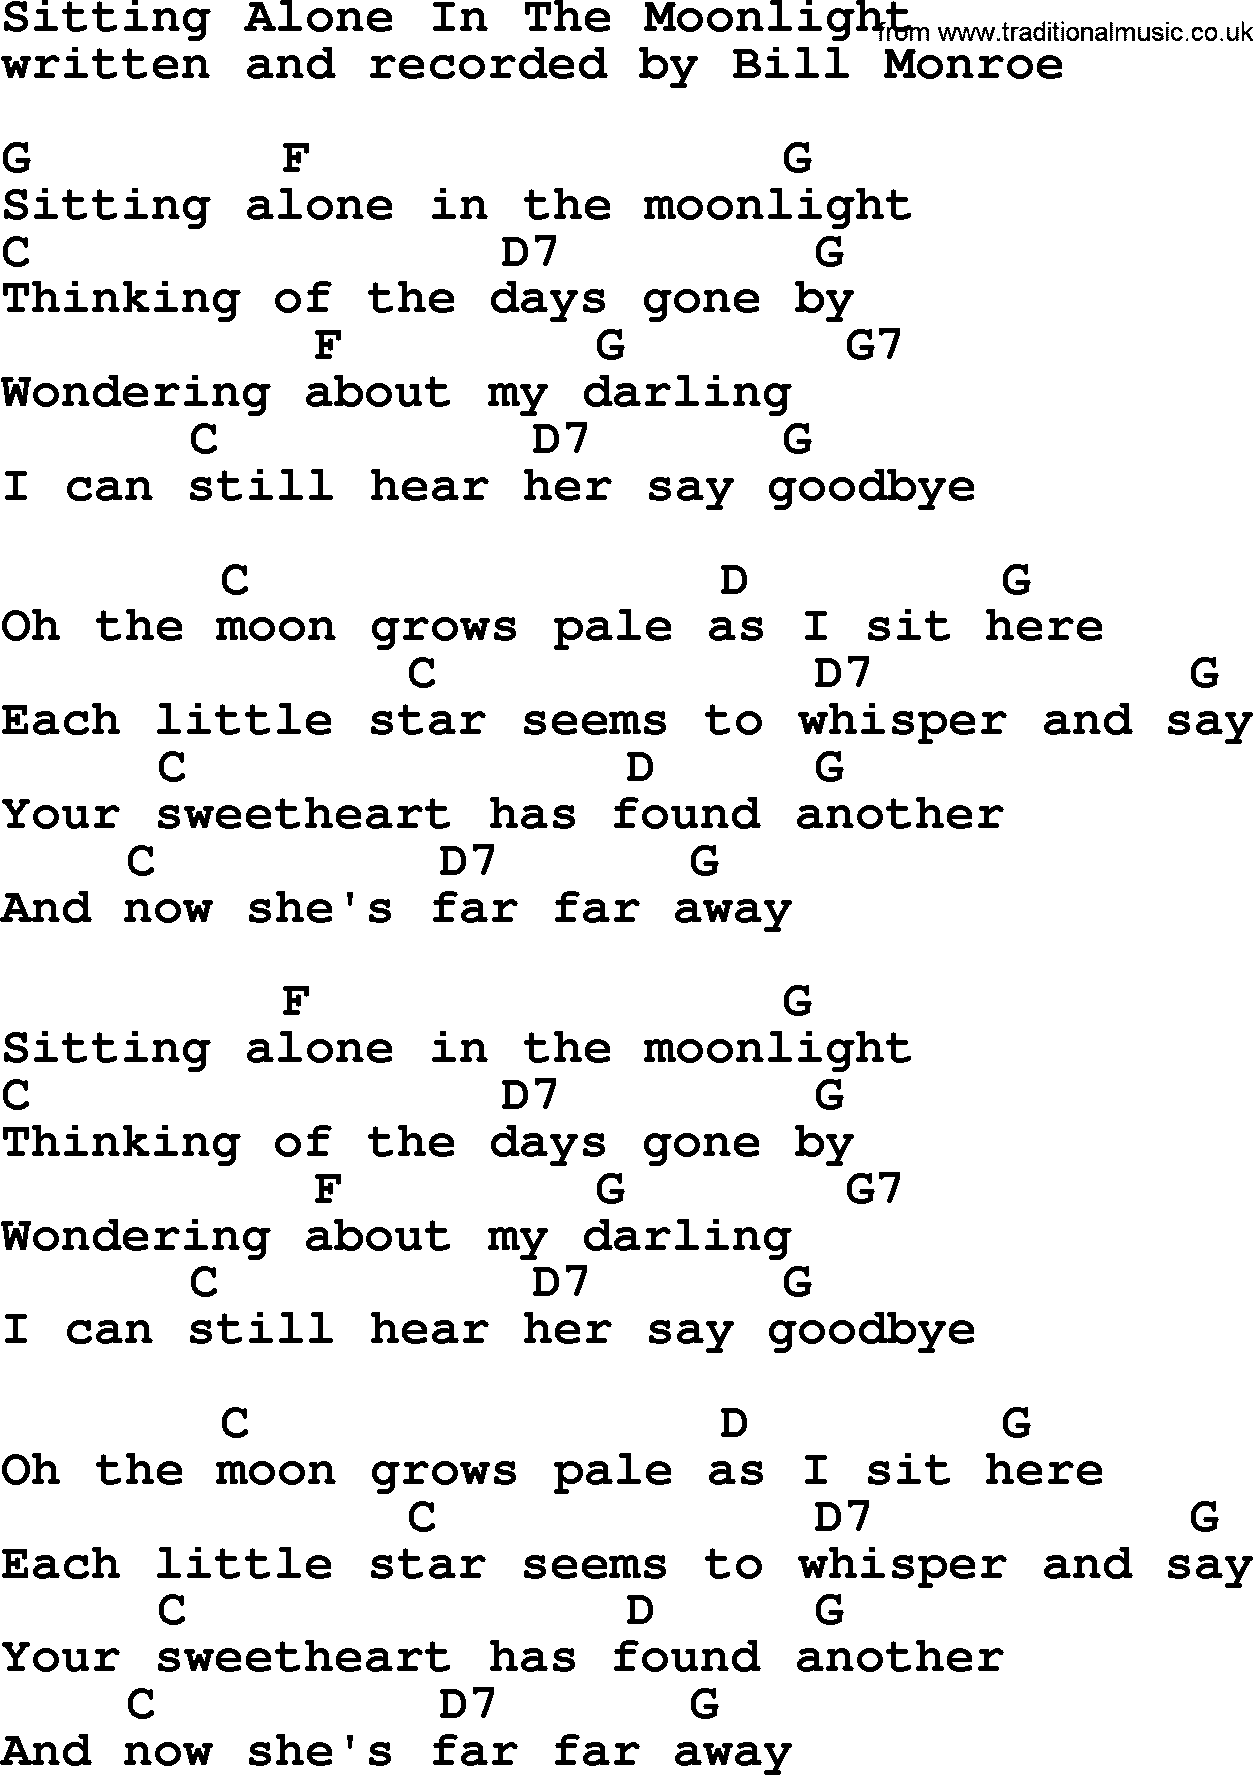 Bluegrass song: Sitting Alone In The Moonlight, lyrics and chords